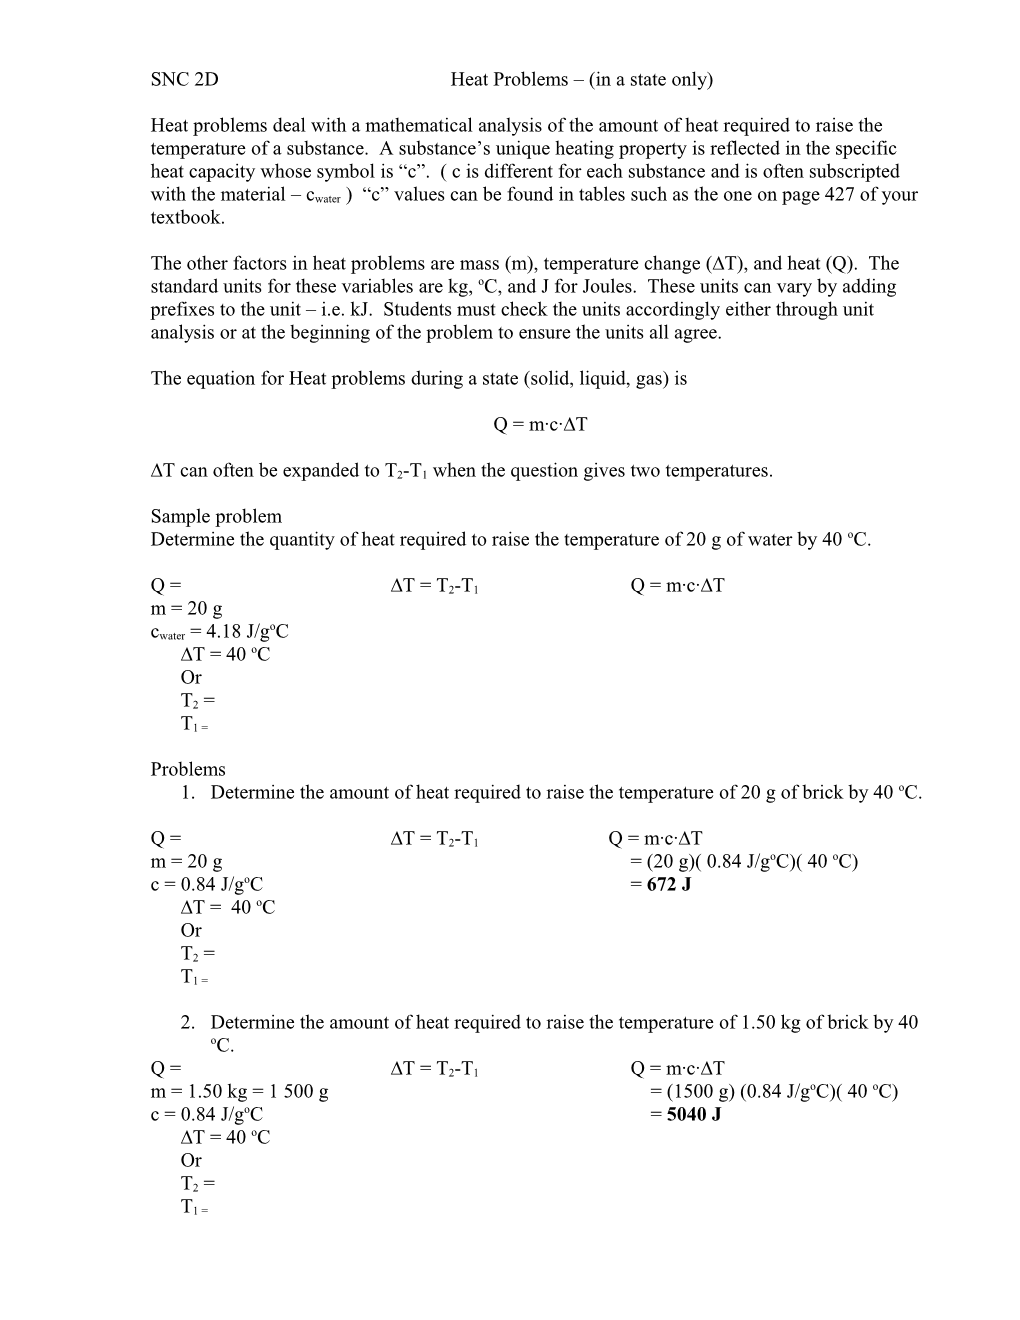 SNC 2Dheat Problems (In a State Only)